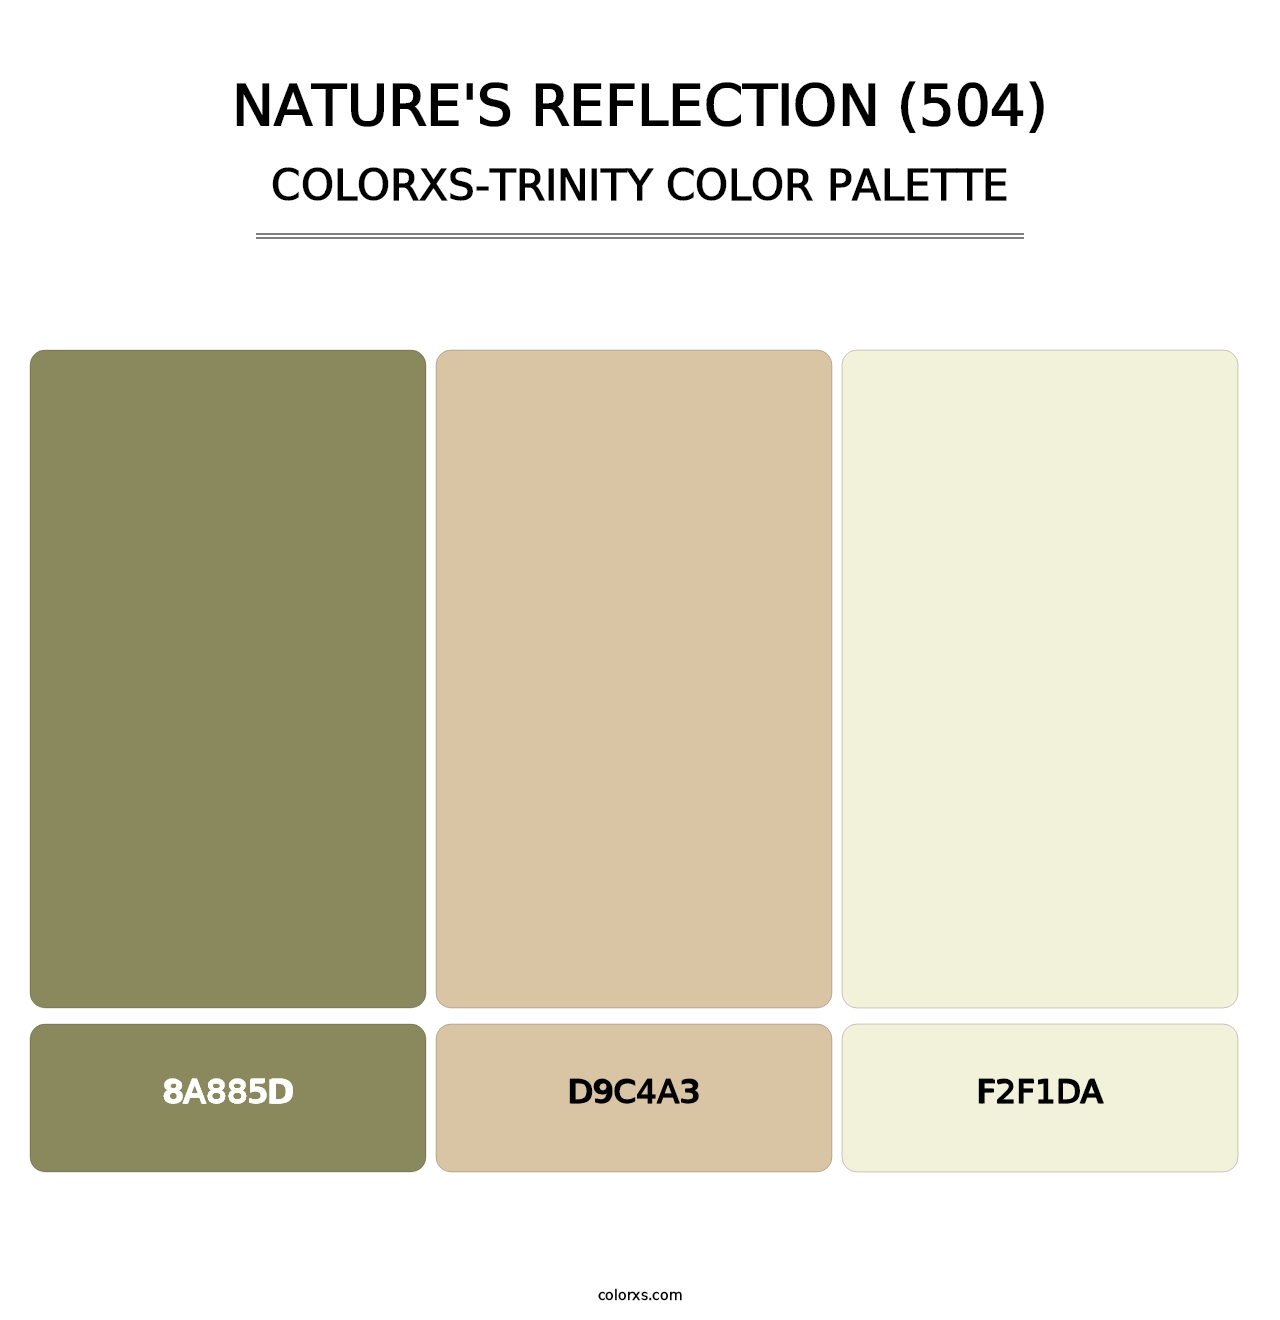 Nature's Reflection (504) - Colorxs Trinity Palette